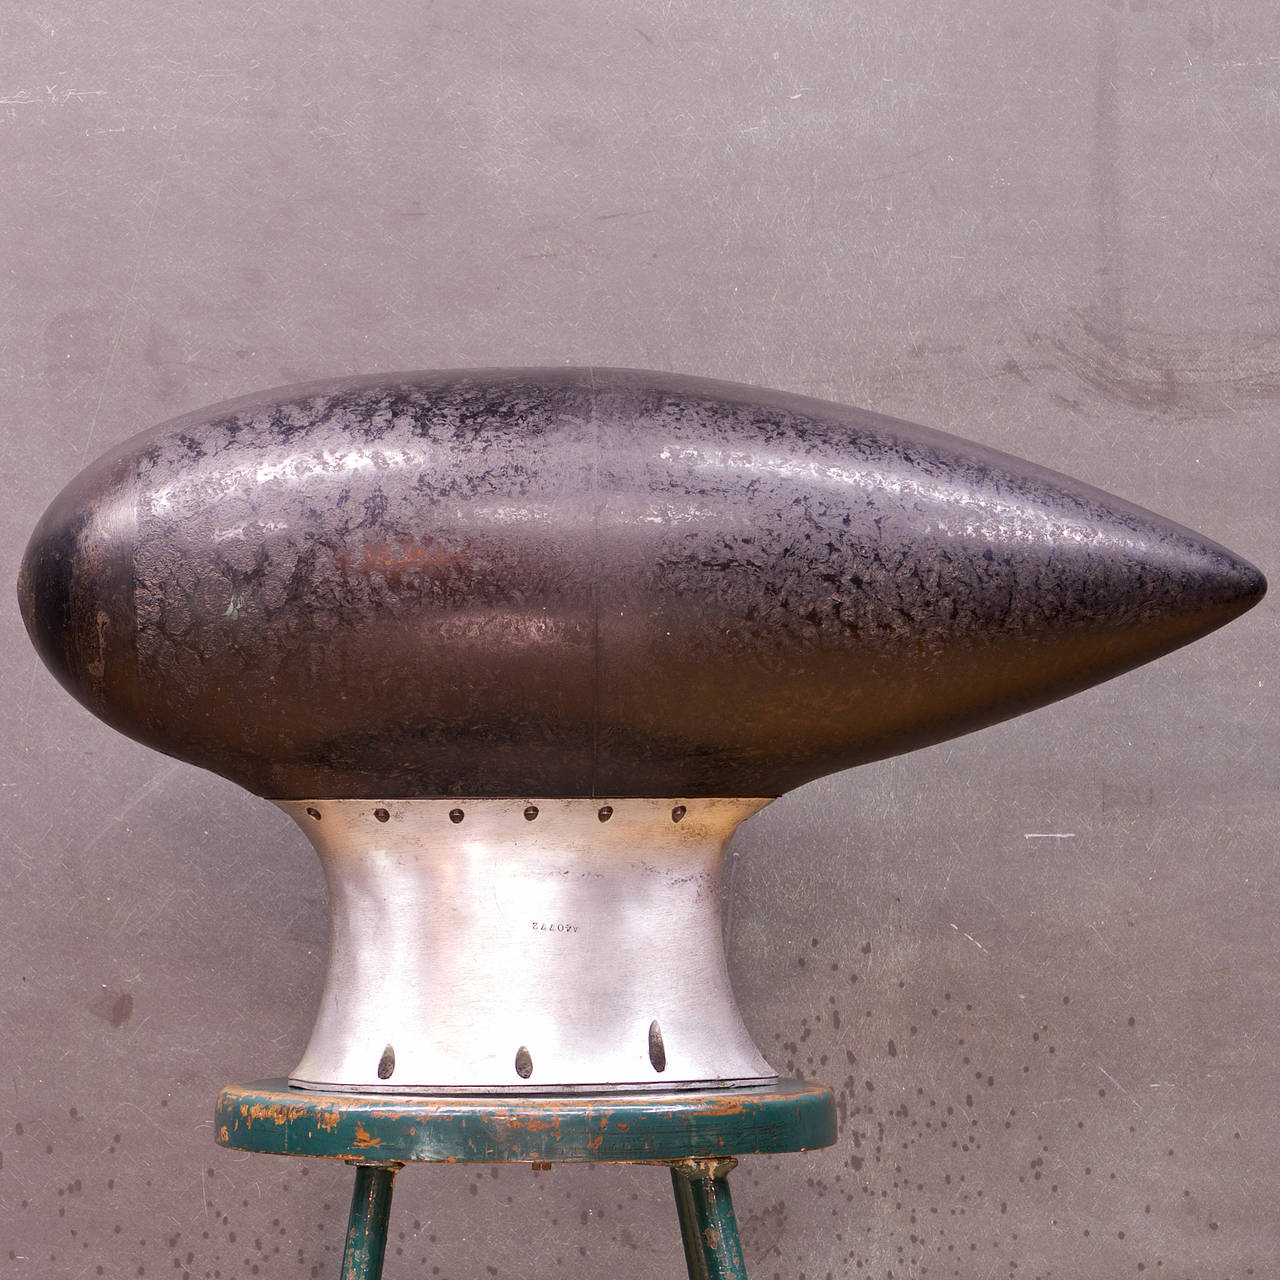 USA, c.1940s. Made in Washington DC. A vintage industrial machine age marvel, Bullet Form Radio Compass Loop Antenna Housing, Yacht Radar Bubble Torpedo Form, Rag-Filled Bakelite and Cast Aluminum, Shielded Aeronautical Radio Device.  As Seen in the